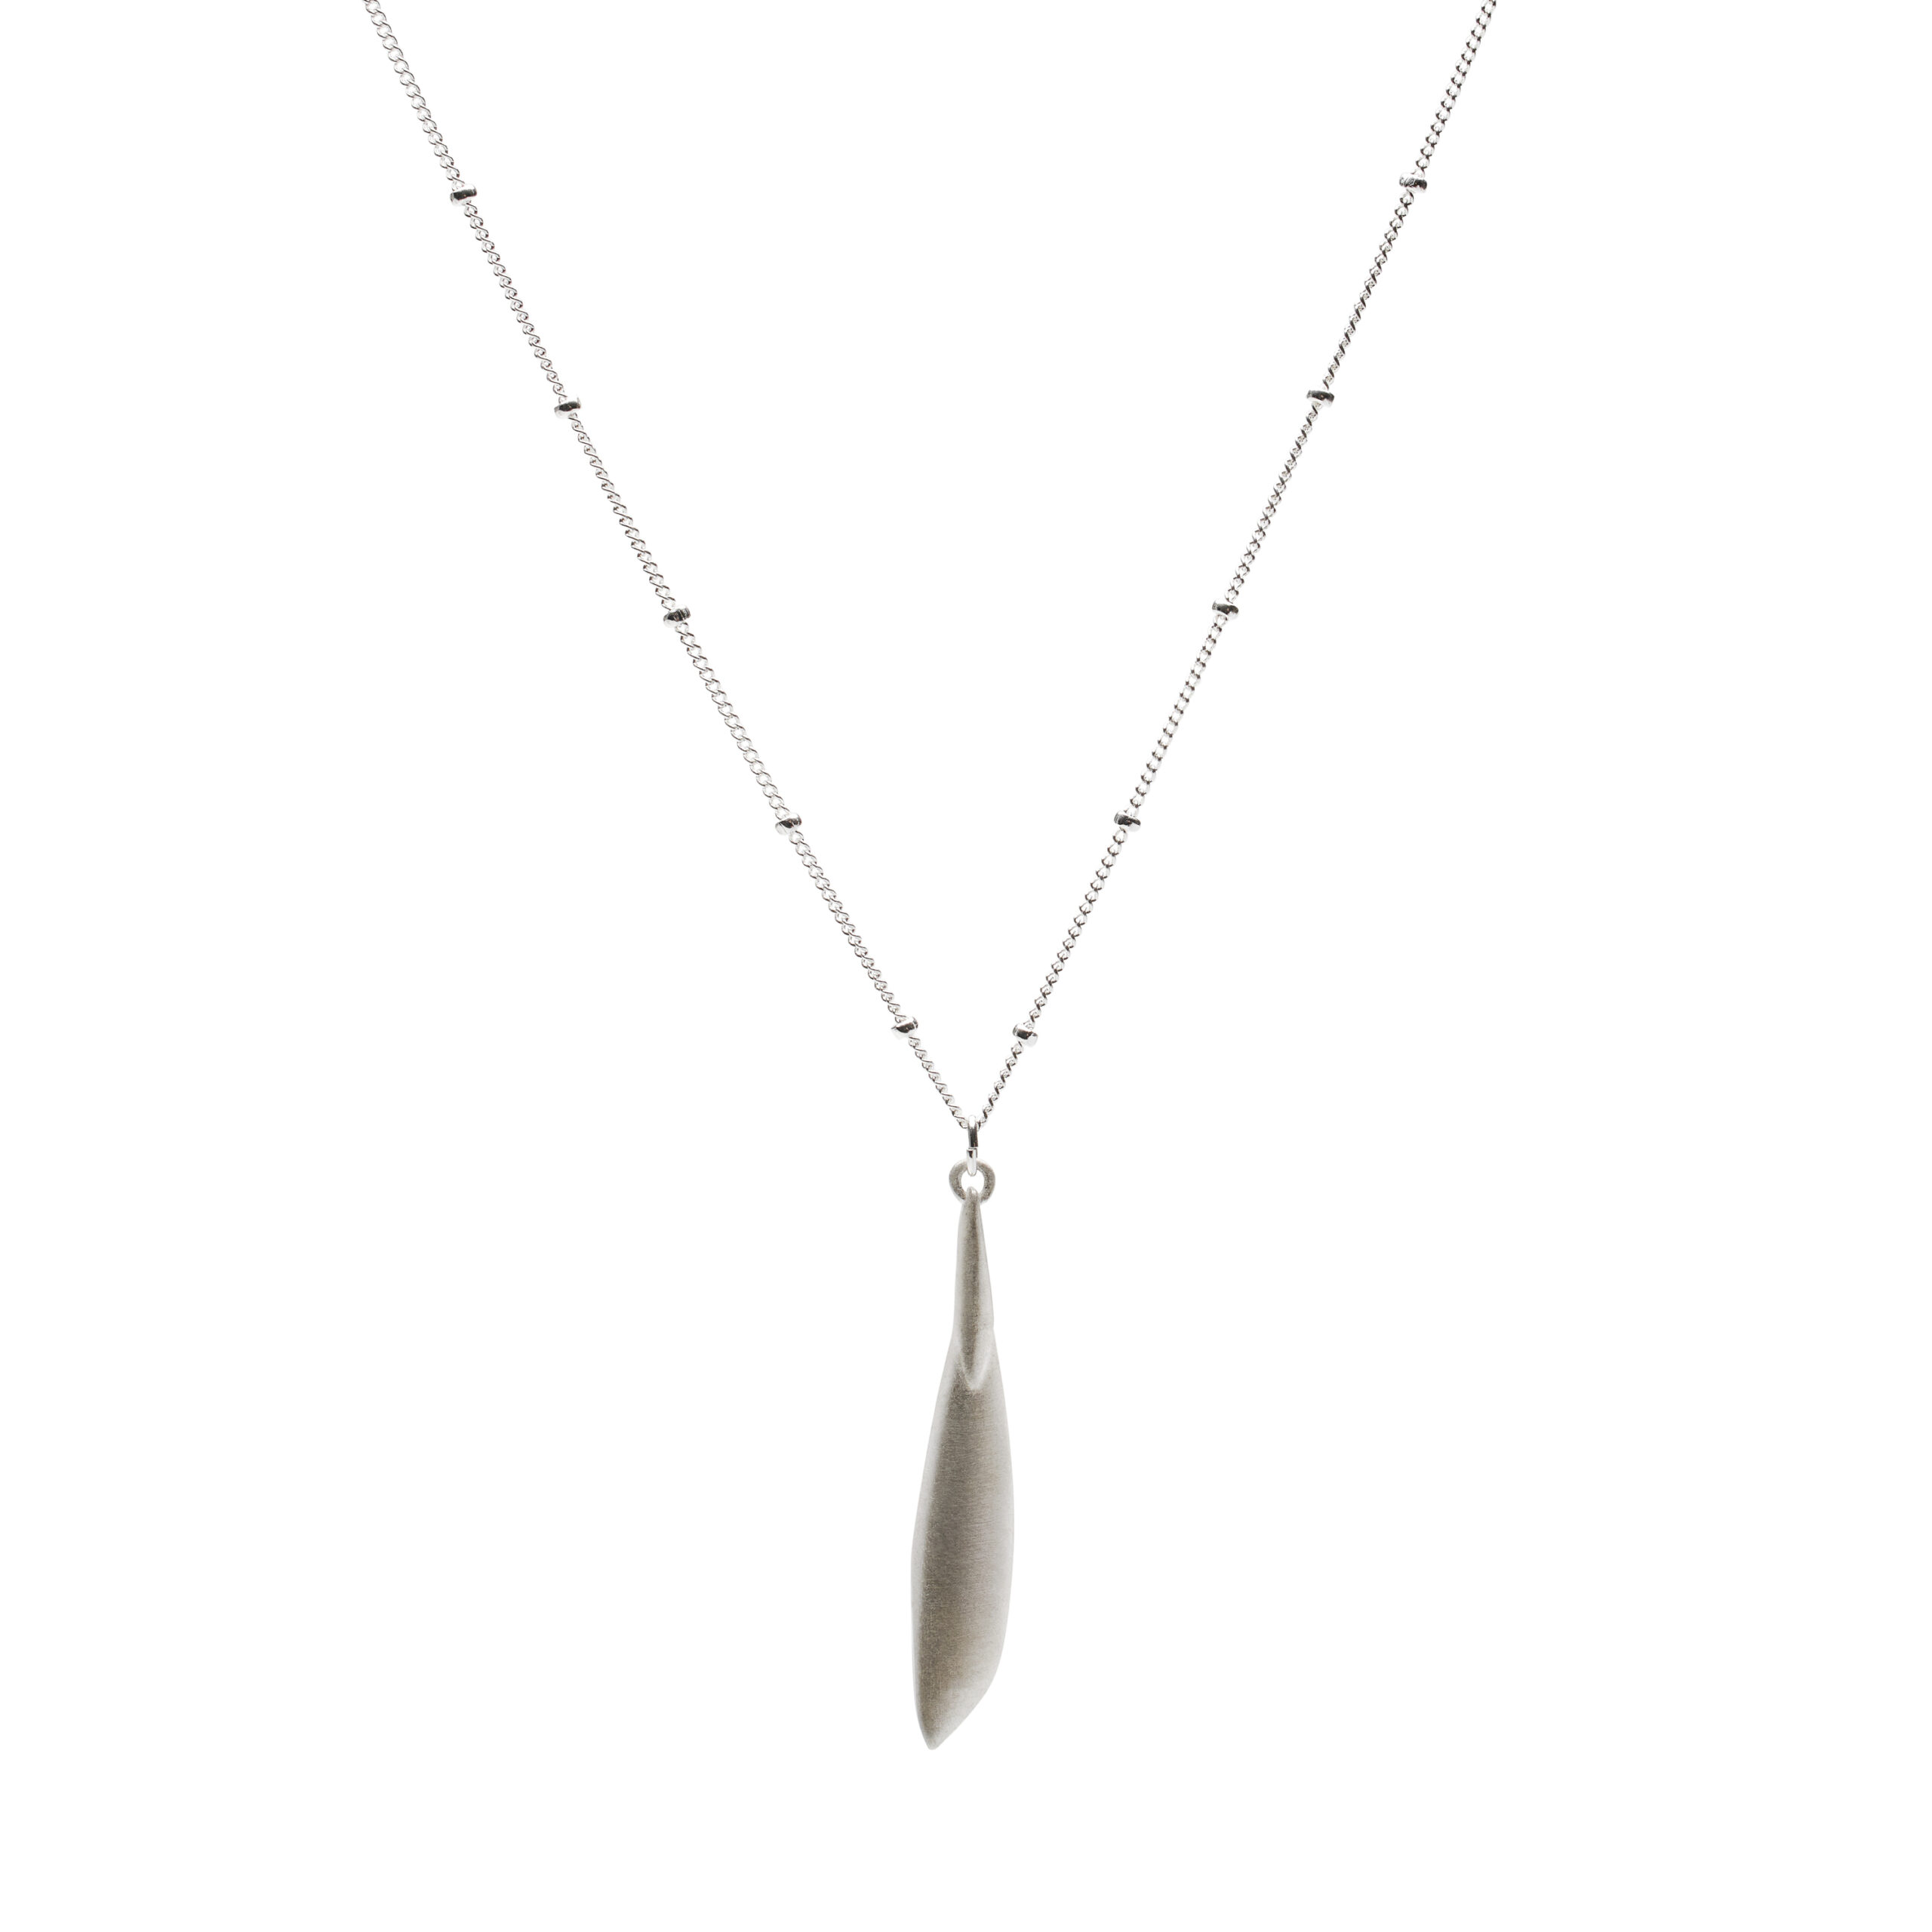 Silver ash tree seed pod necklace